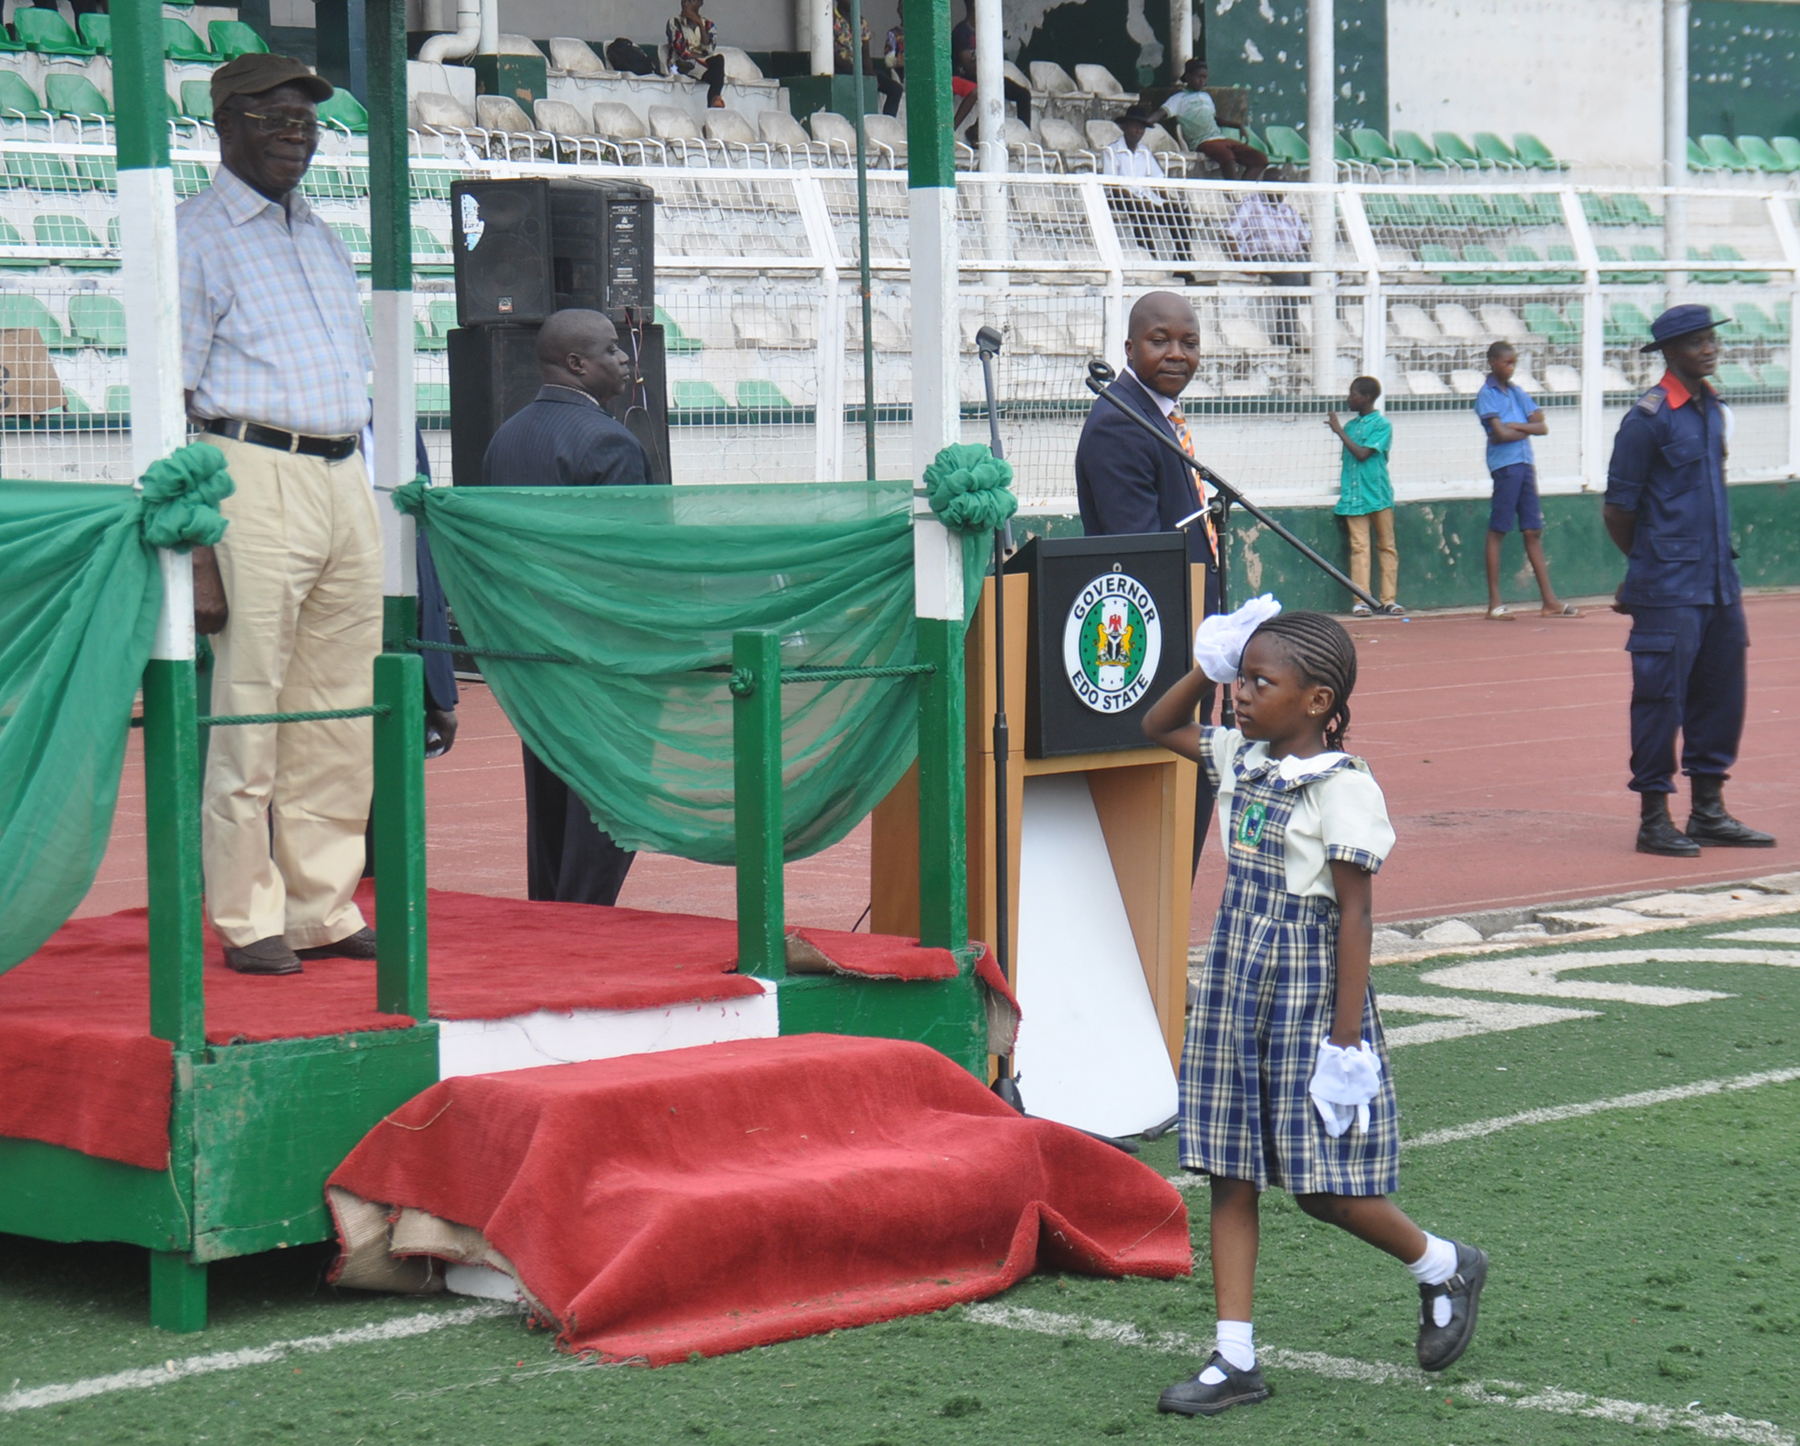 A pupil of Flourish Royal Academy, Benin City salutes Governor Adams Oshiomhole during a march past at the 2016 Children's Day celebration in Benin City on Friday.